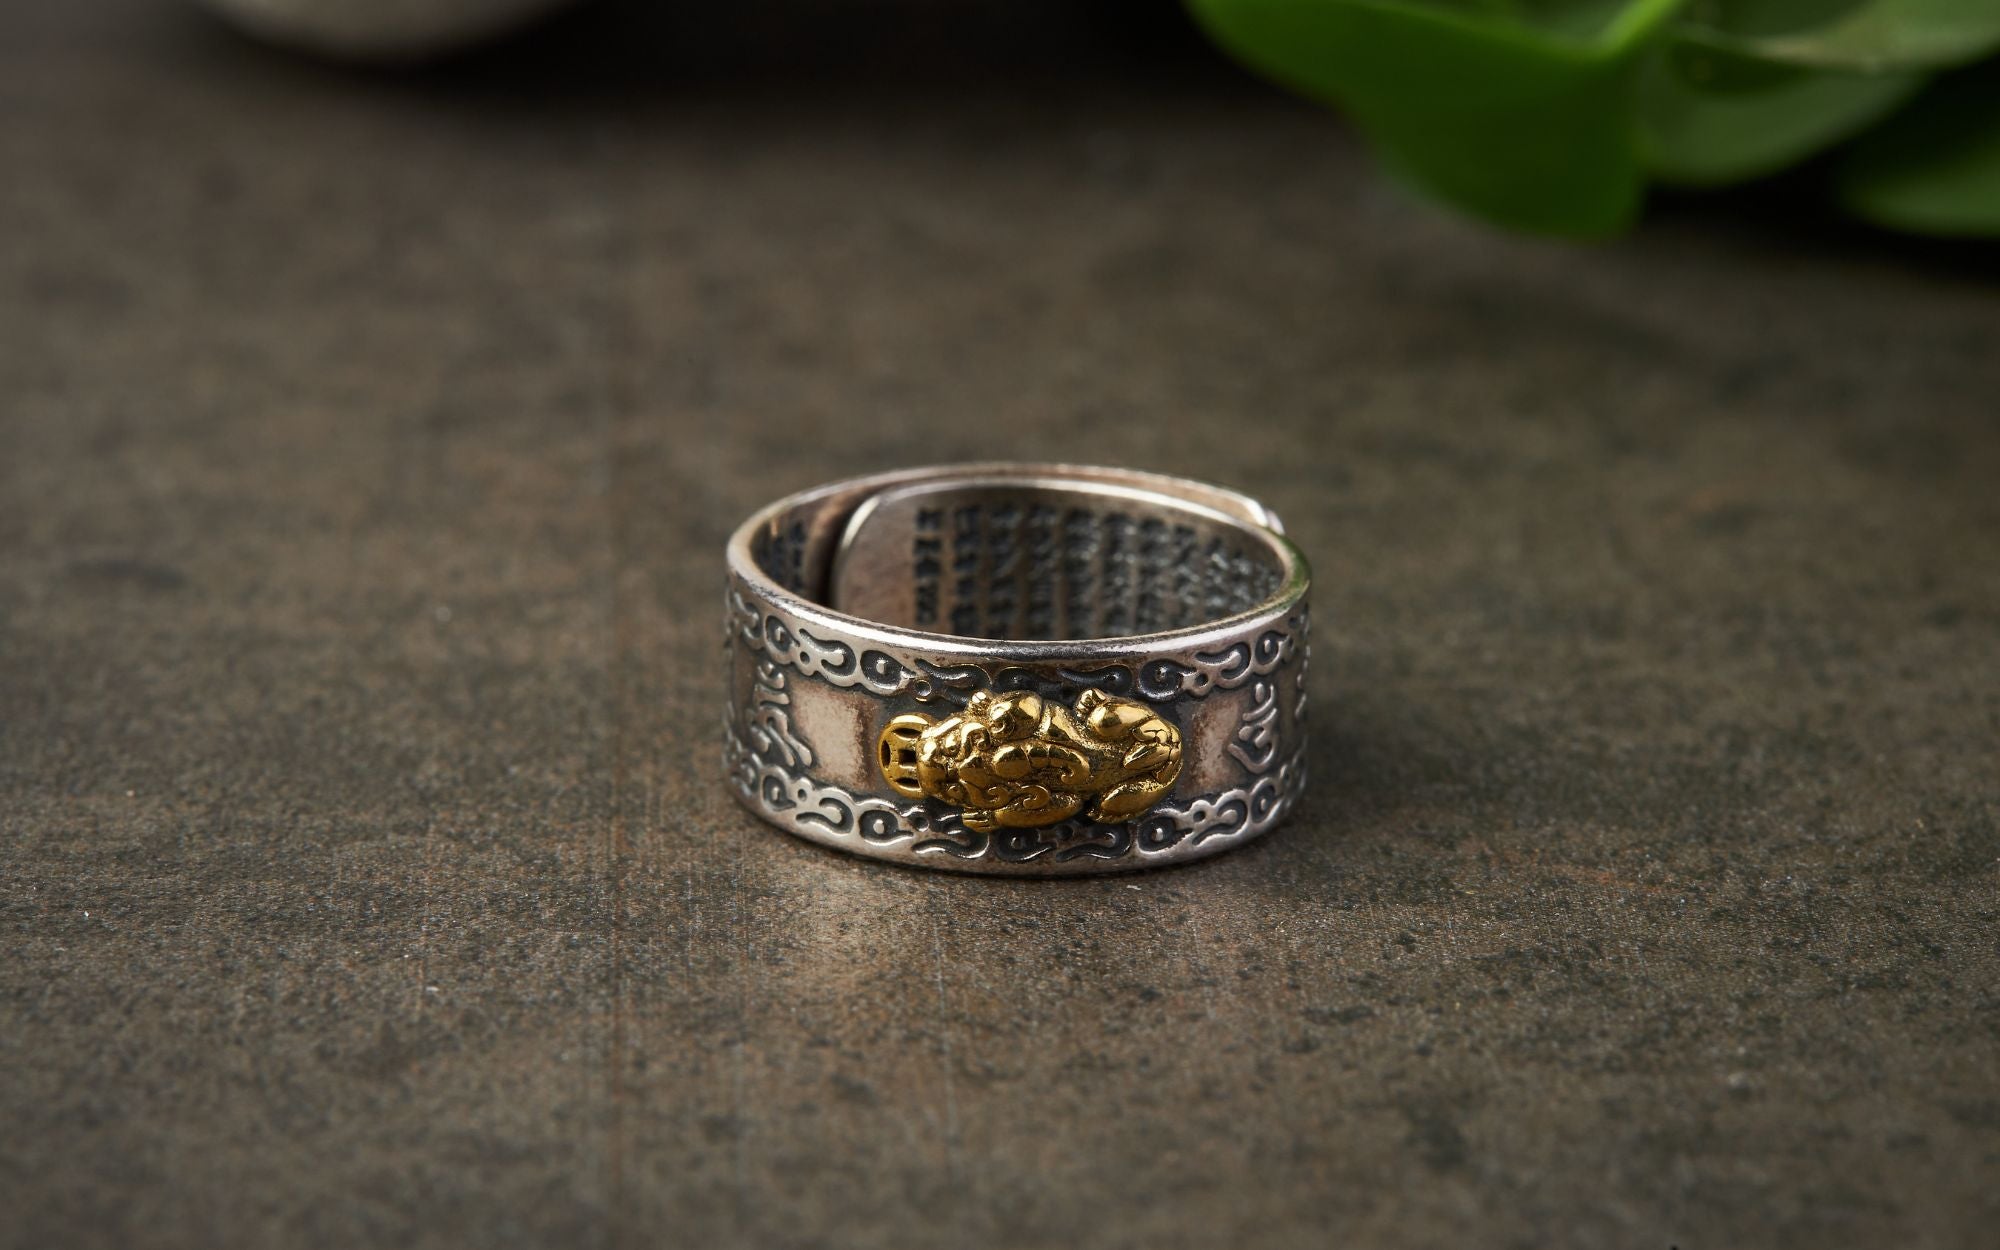 Feng Shui Ring: Meaning, Benefits, How to Wear, and Rules – Buddha & Karma